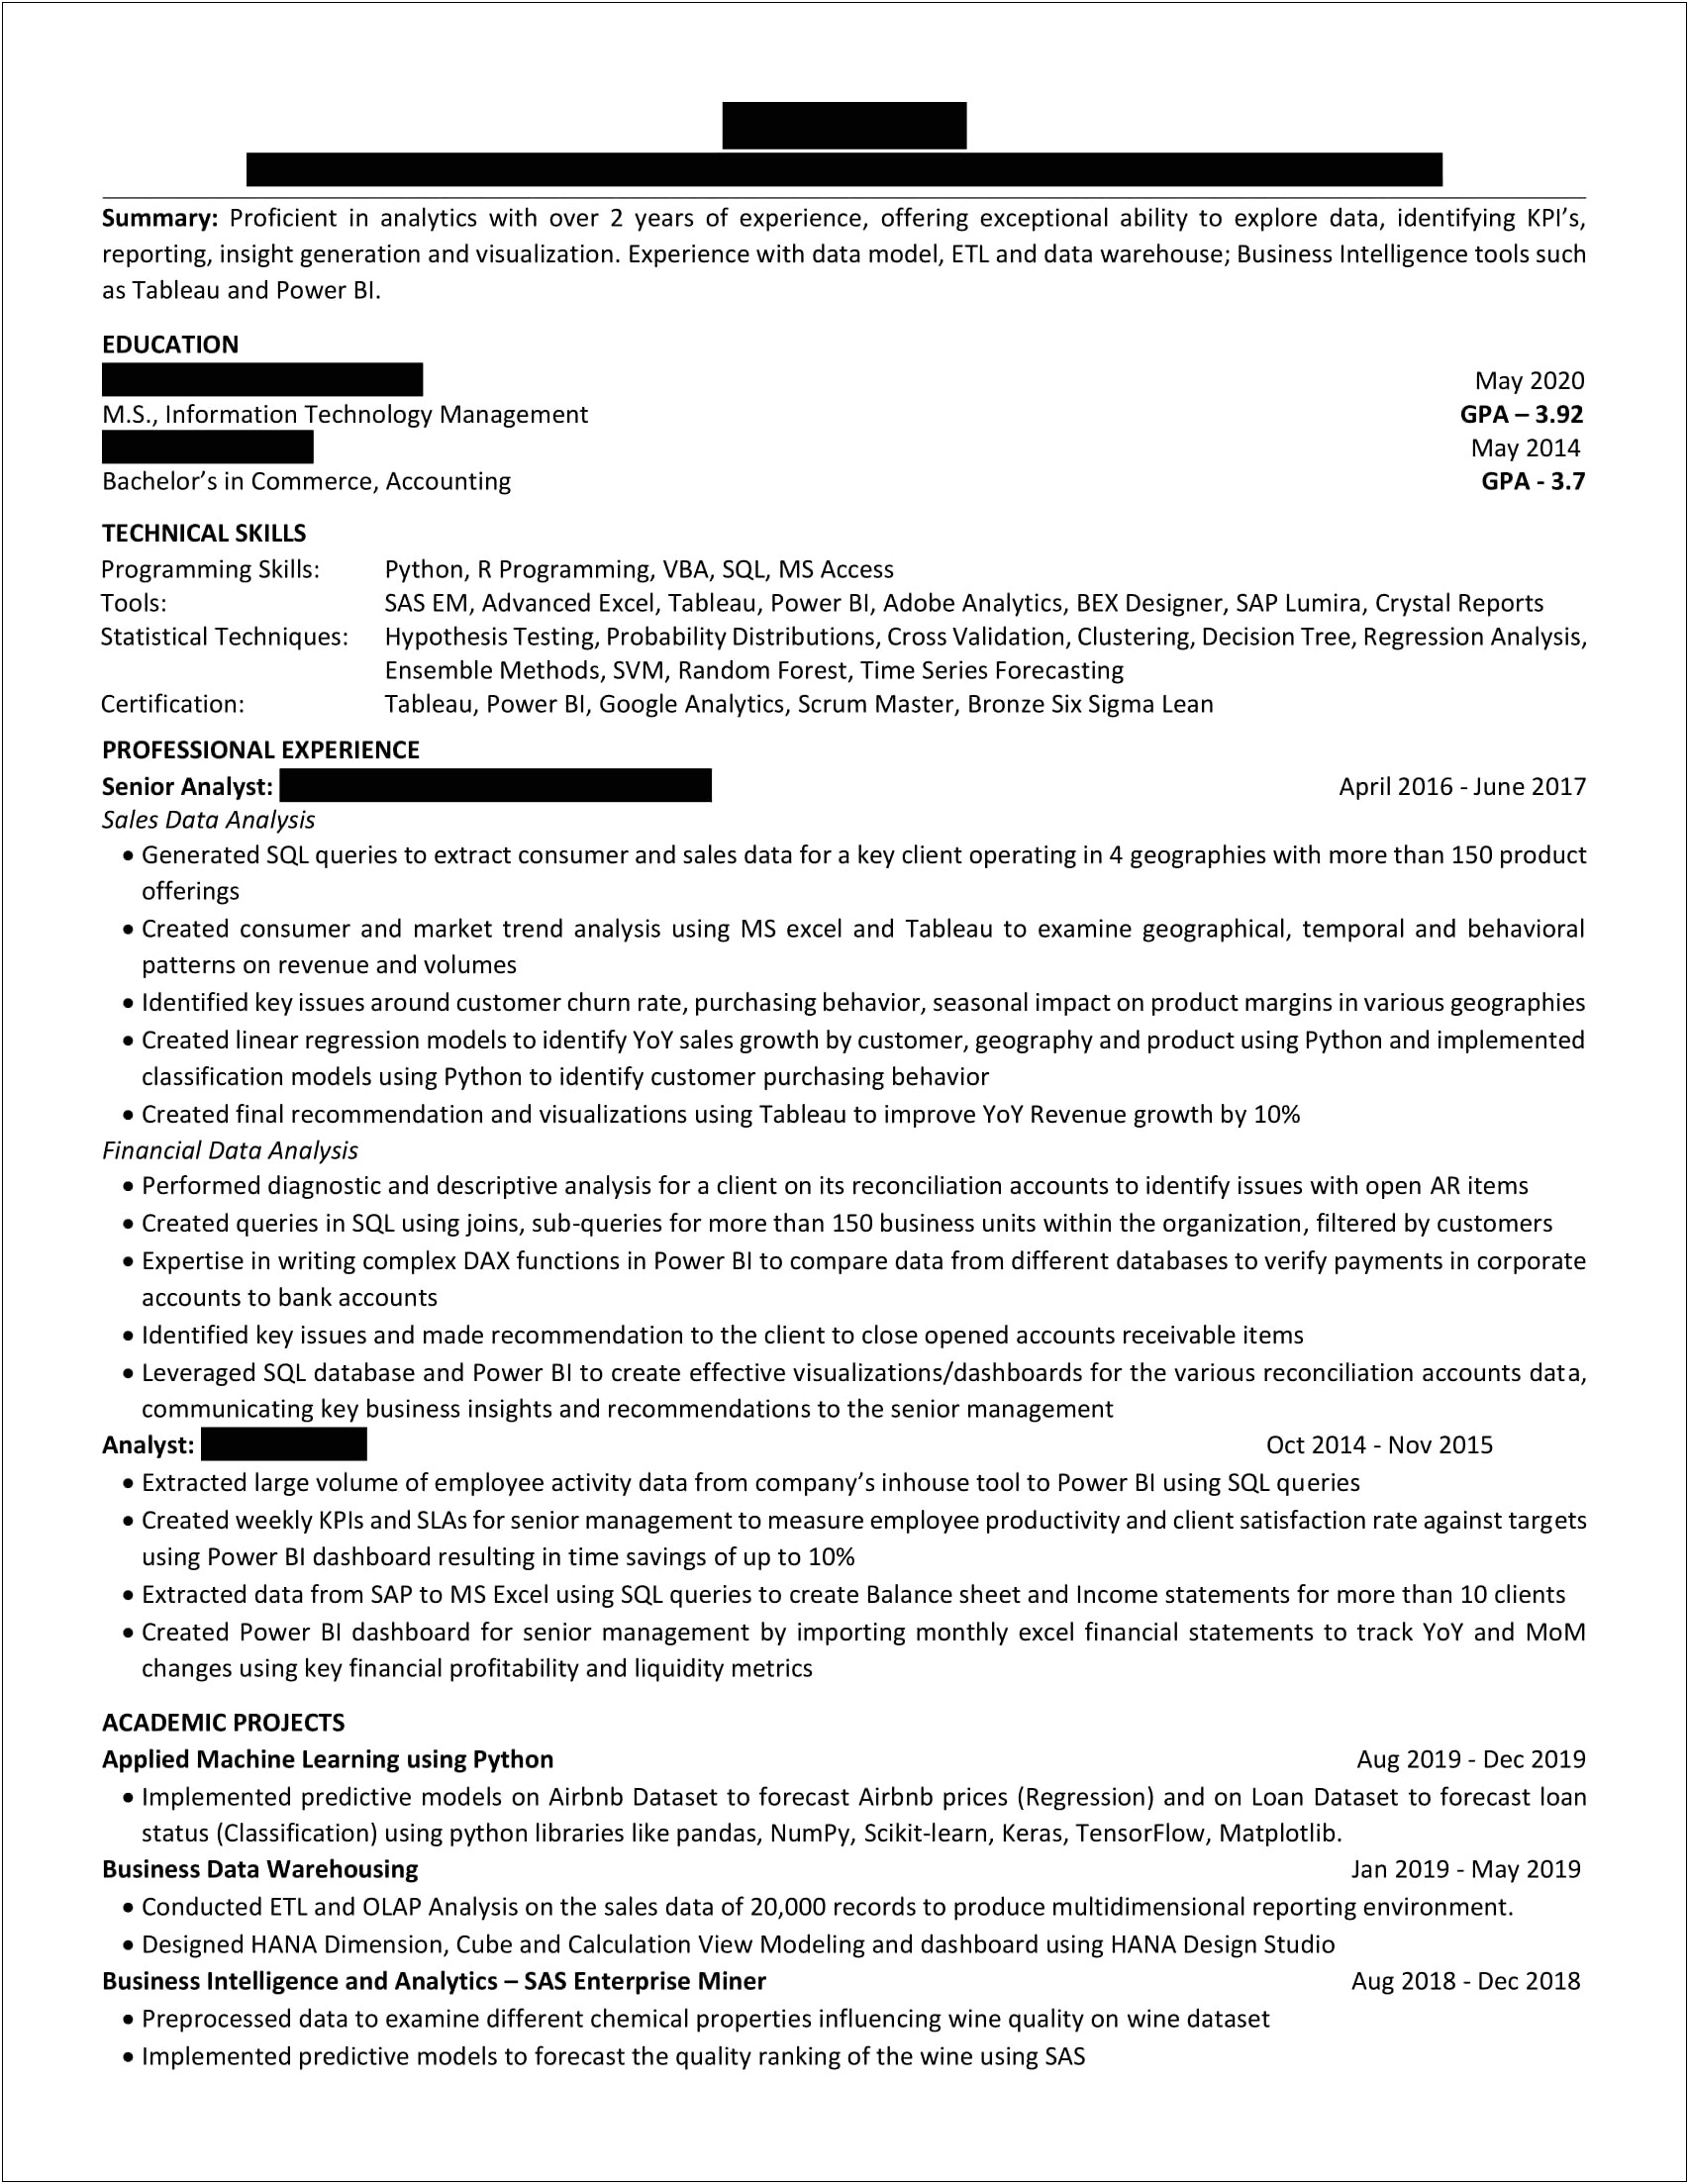 Entry Level Accounting Information Systems Resume Summary